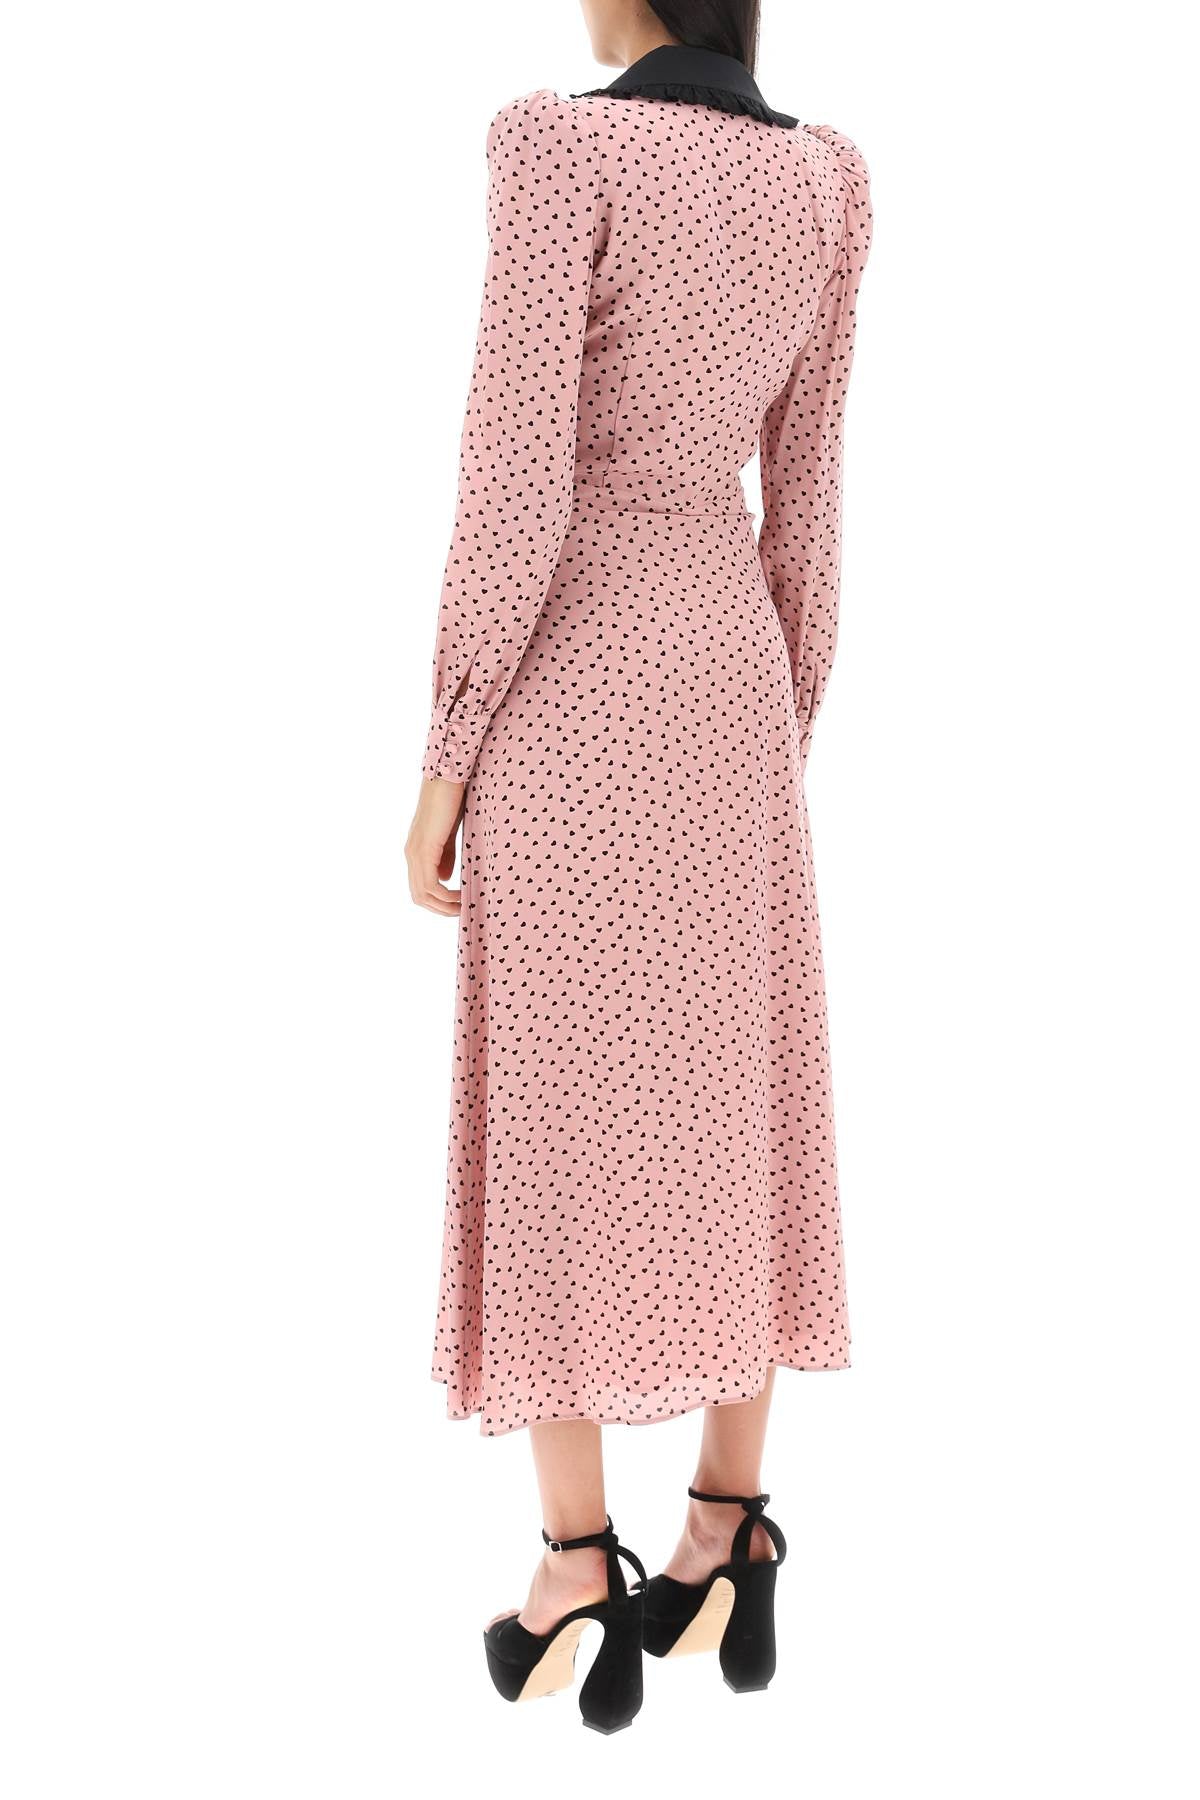 Alessandra rich midi dress with contrasting collar-women > clothing > dresses > midi-Alessandra Rich-38-Mixed colours-Urbanheer